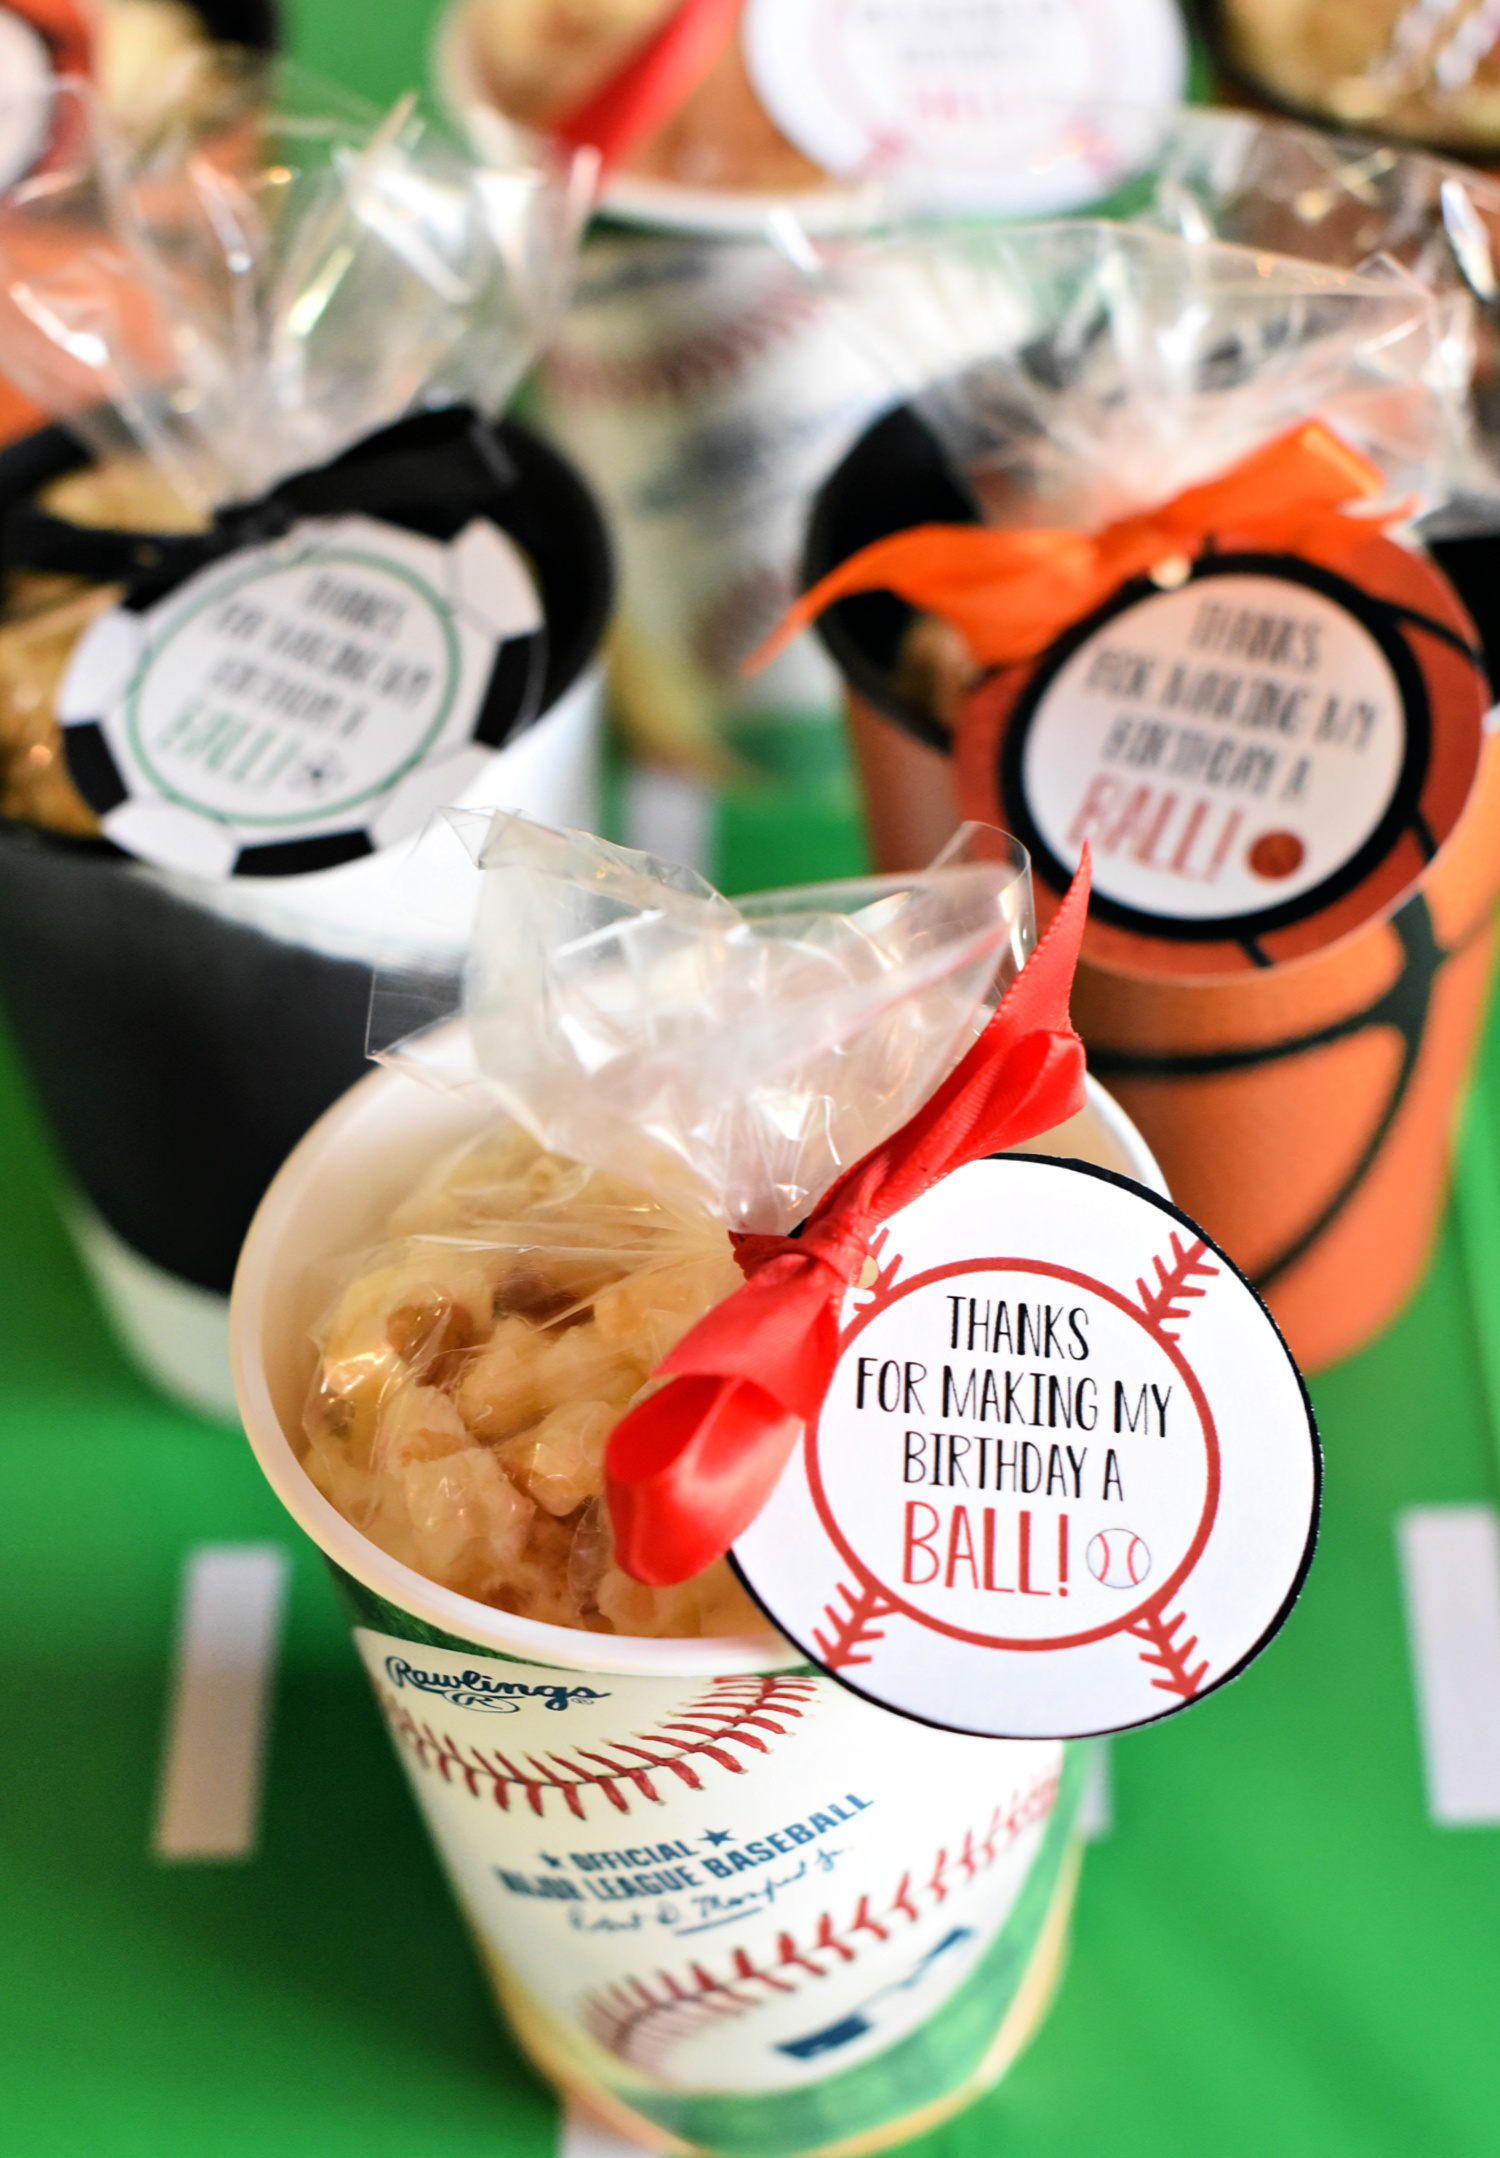 Sports Themed Party Favors for any sports birthday party. Basketball, soccer, baseball-these cute party favor tags.